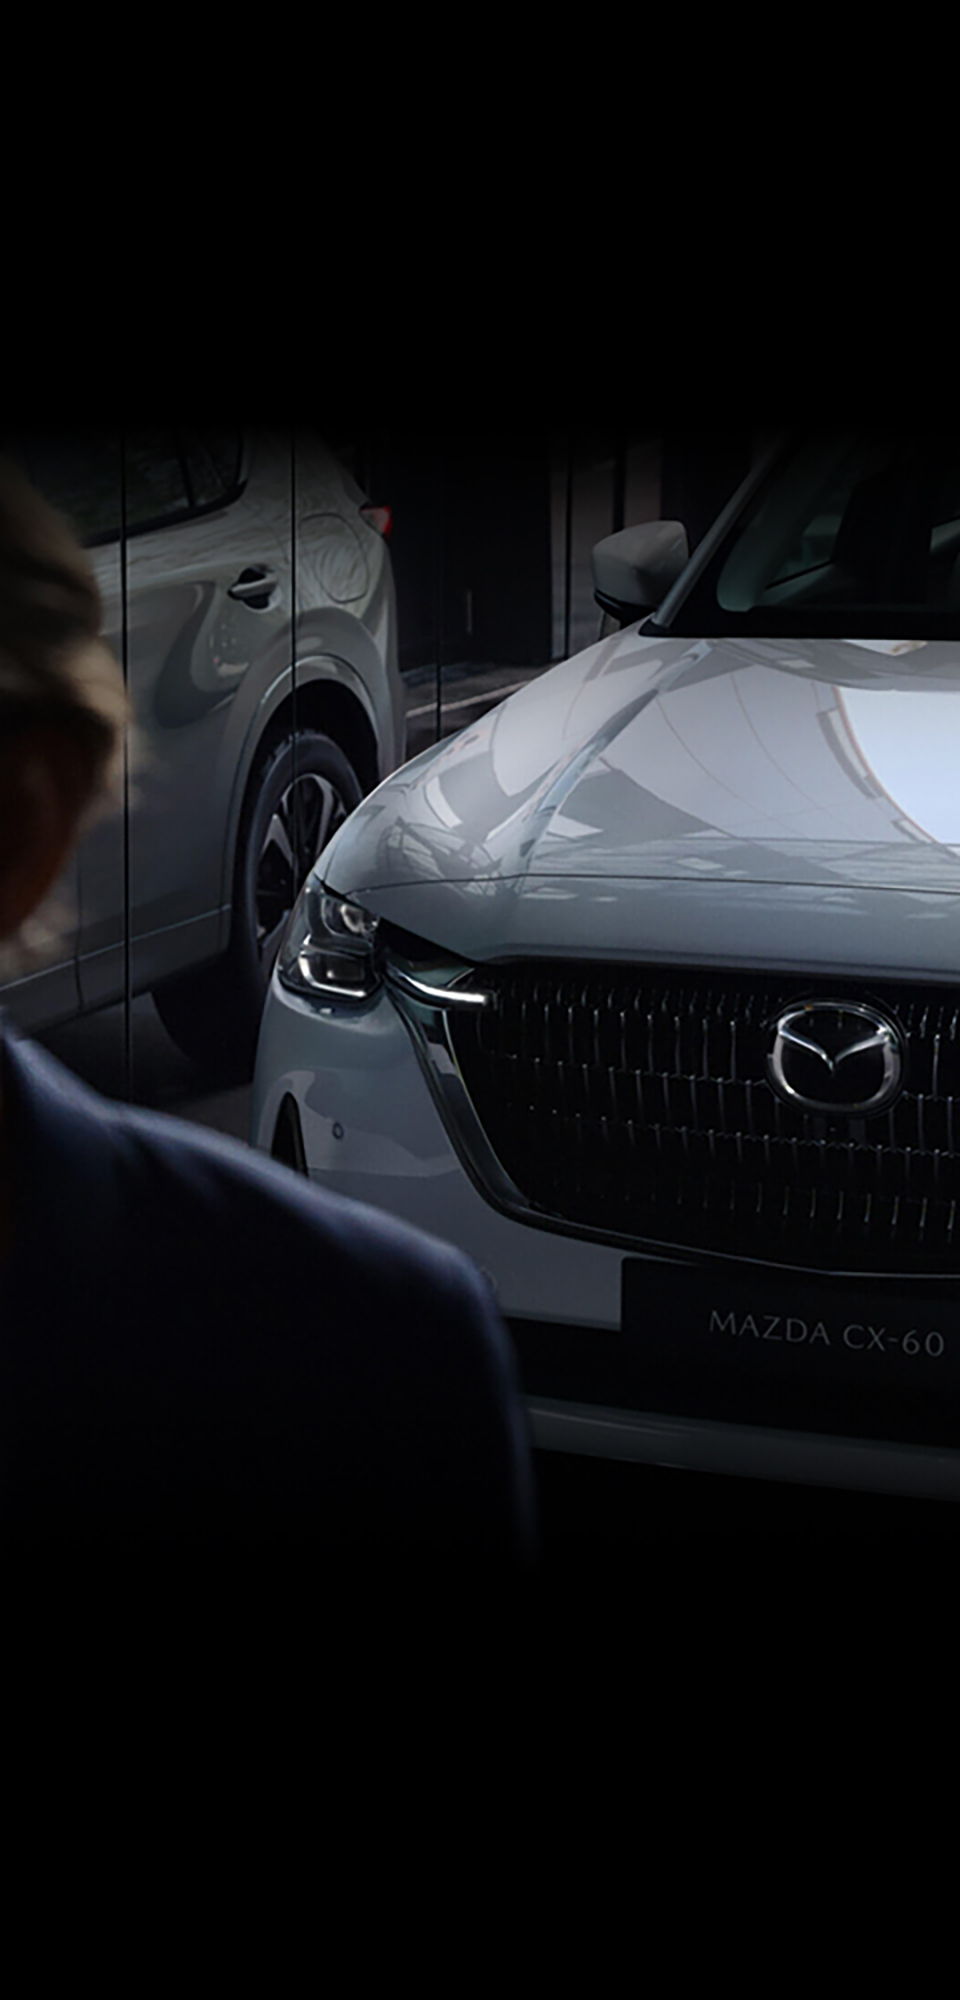 The all-new Mazda CX-60 Plug-In Hybrid SUV shown from the front reflecting in a glass window